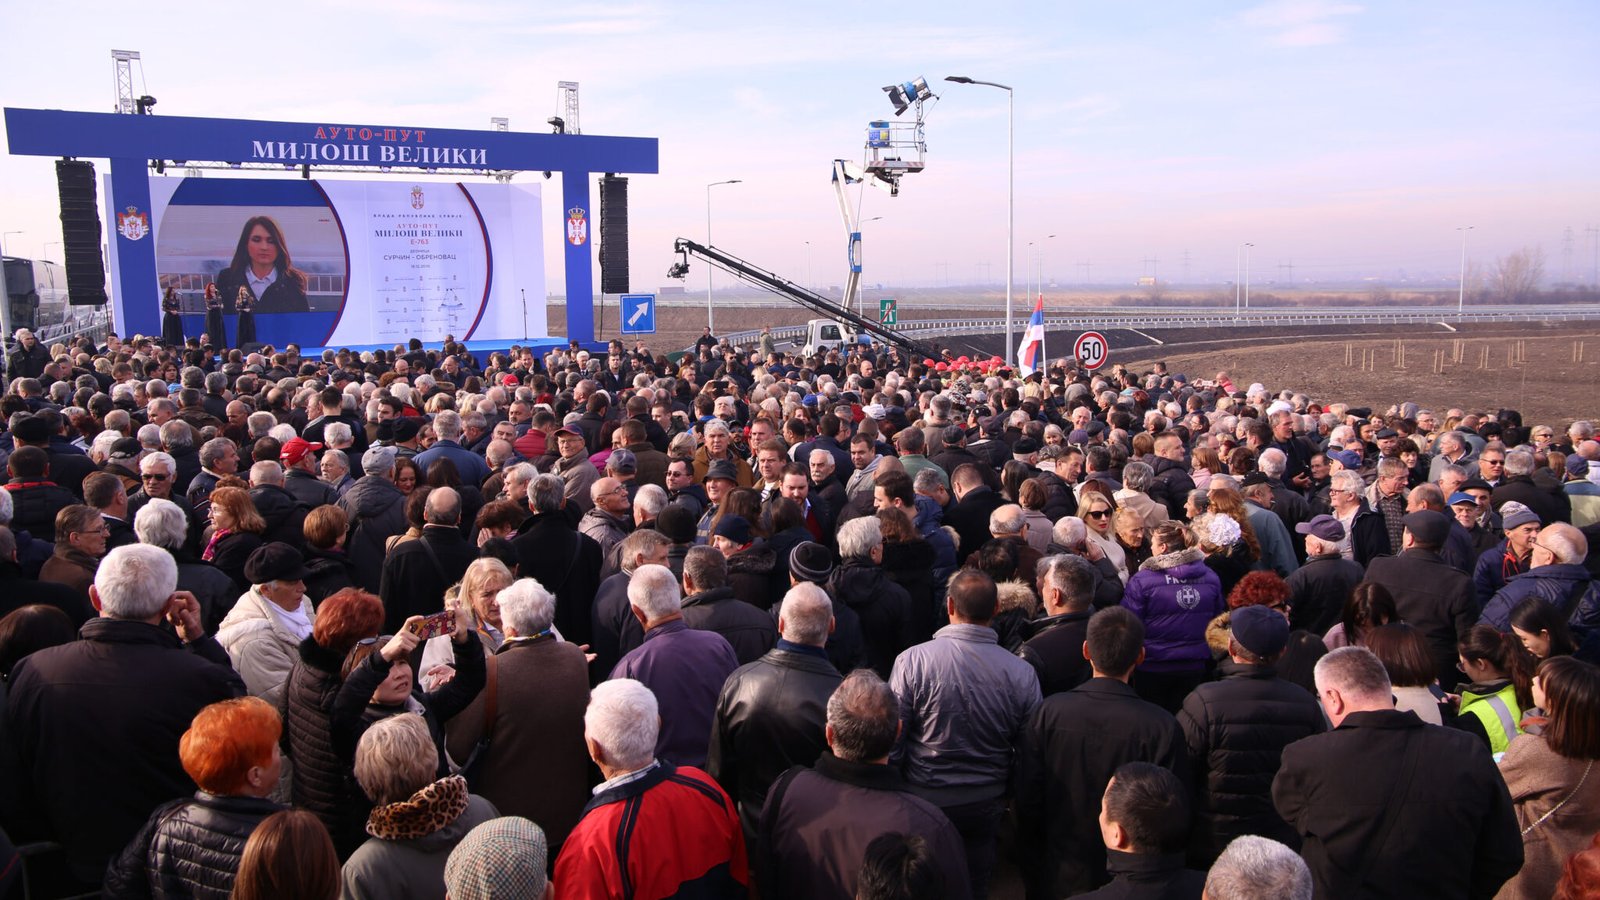 People attend the opening ceremony of a highway section in Belgrade